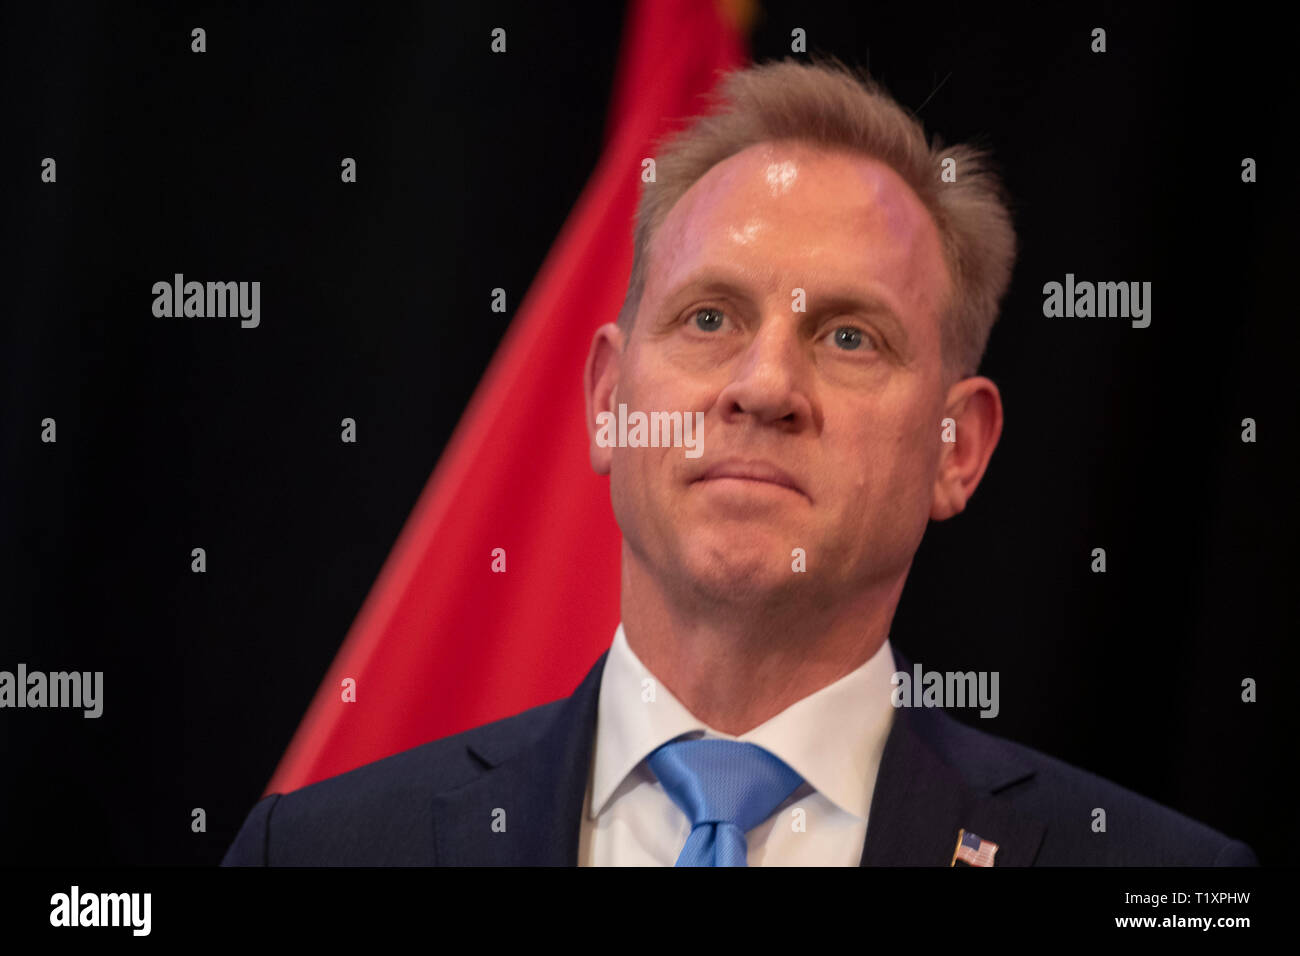 U.S. Acting Secretary of Defense Patrick M. Shanahan attends the U.S. Central Command change of command, Tampa, Florida, March 28, 2019. U.S. Army Gen. Joseph L. Votel, who retired after 39 years of military service, was succeeded as Centcom commander by U.S. Marine Corps Gen. Kenneth F. McKenzie Jr. (DoD photo by Lisa Ferdinando) Stock Photo